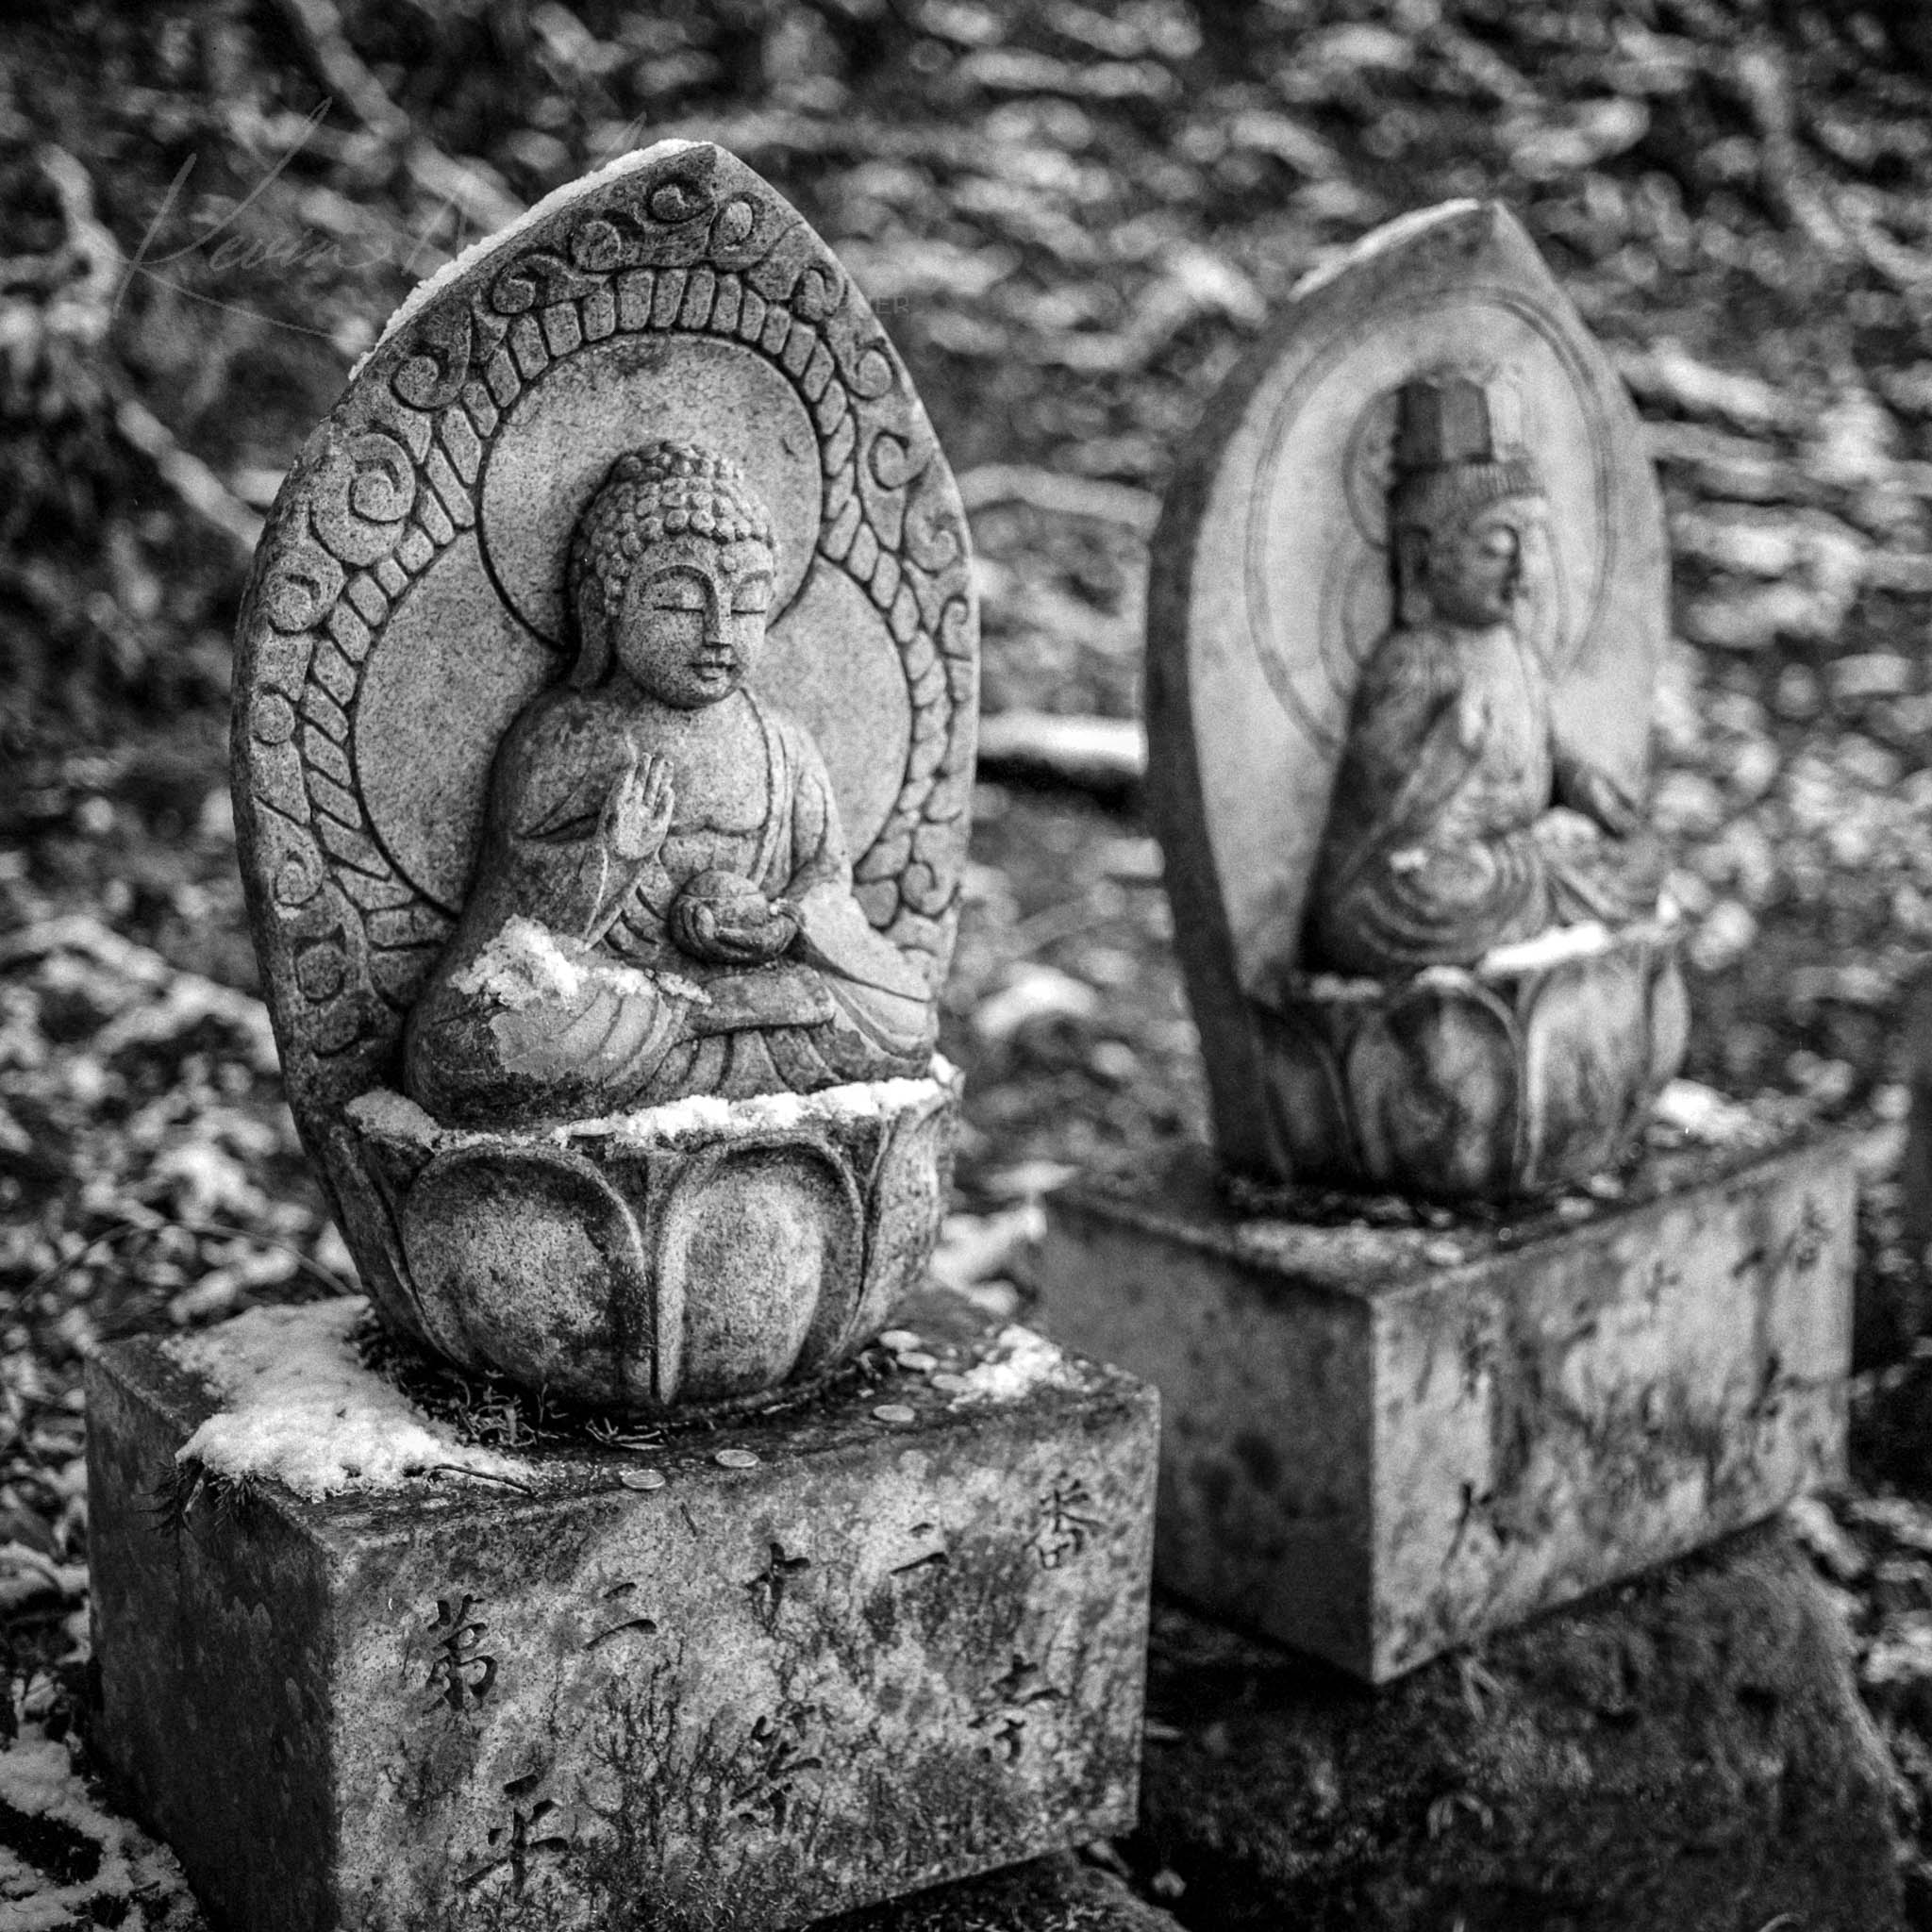 Ancient stone Buddha statues in peaceful meditation, black and white image.